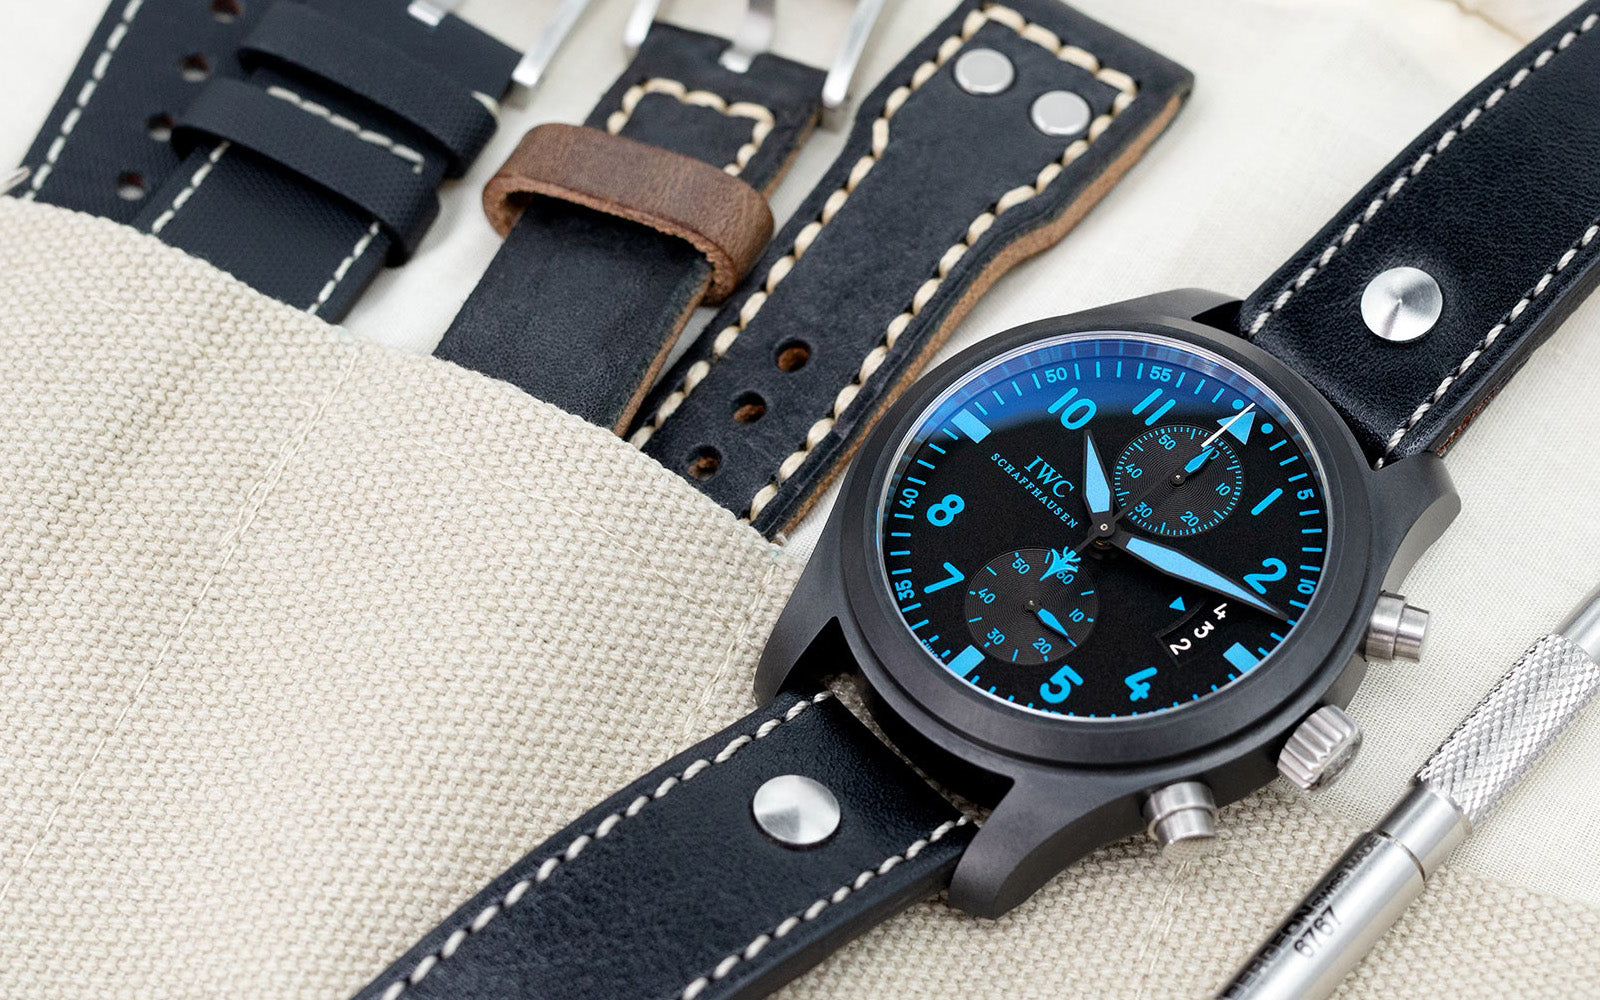 Rivet Lug leather watch bands pairs with IWC Big Pilot watch by Strapcode